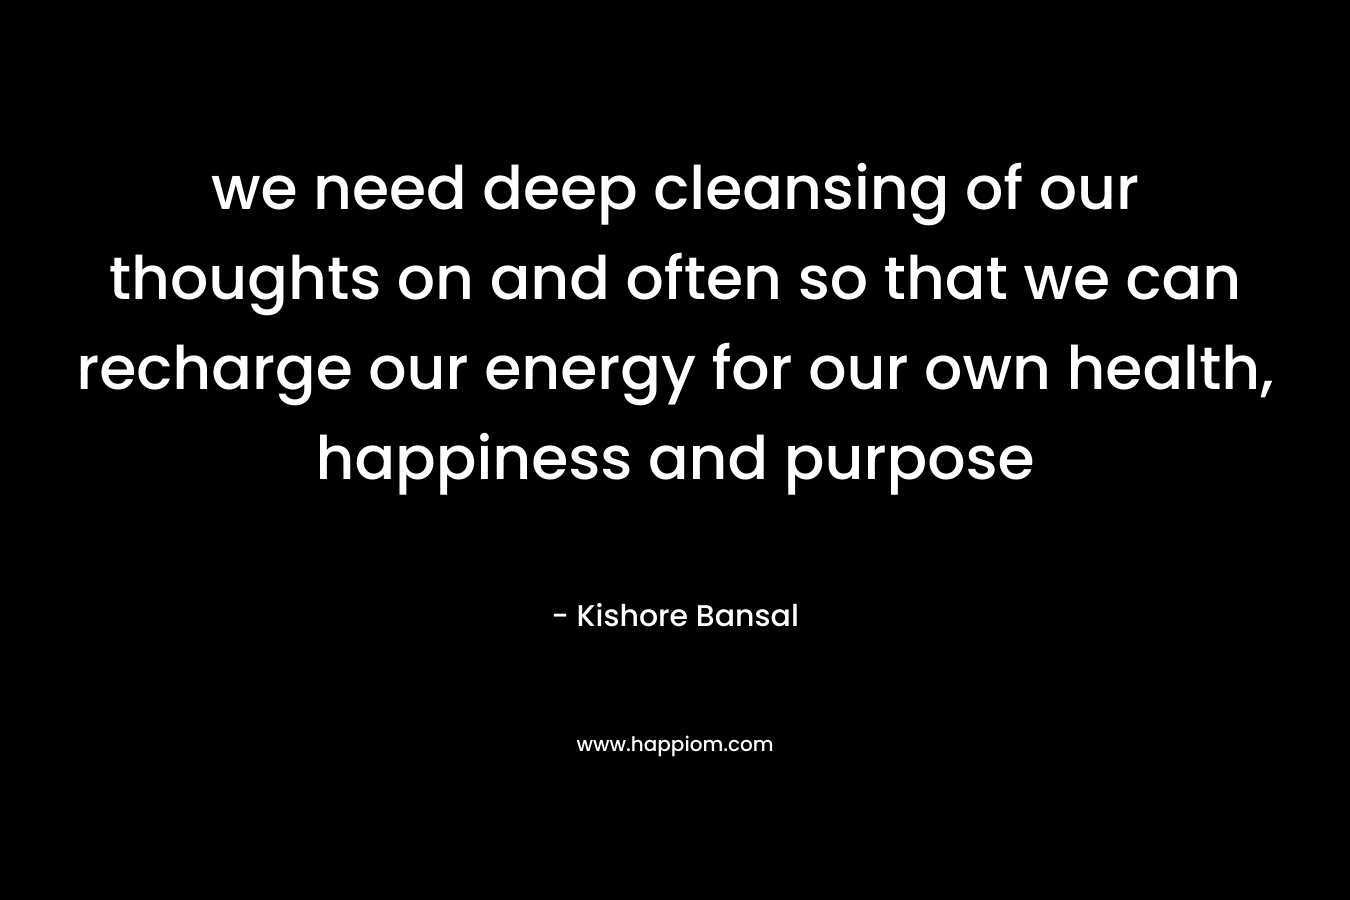 we need deep cleansing of our thoughts on and often so that we can recharge our energy for our own health, happiness and purpose – Kishore Bansal